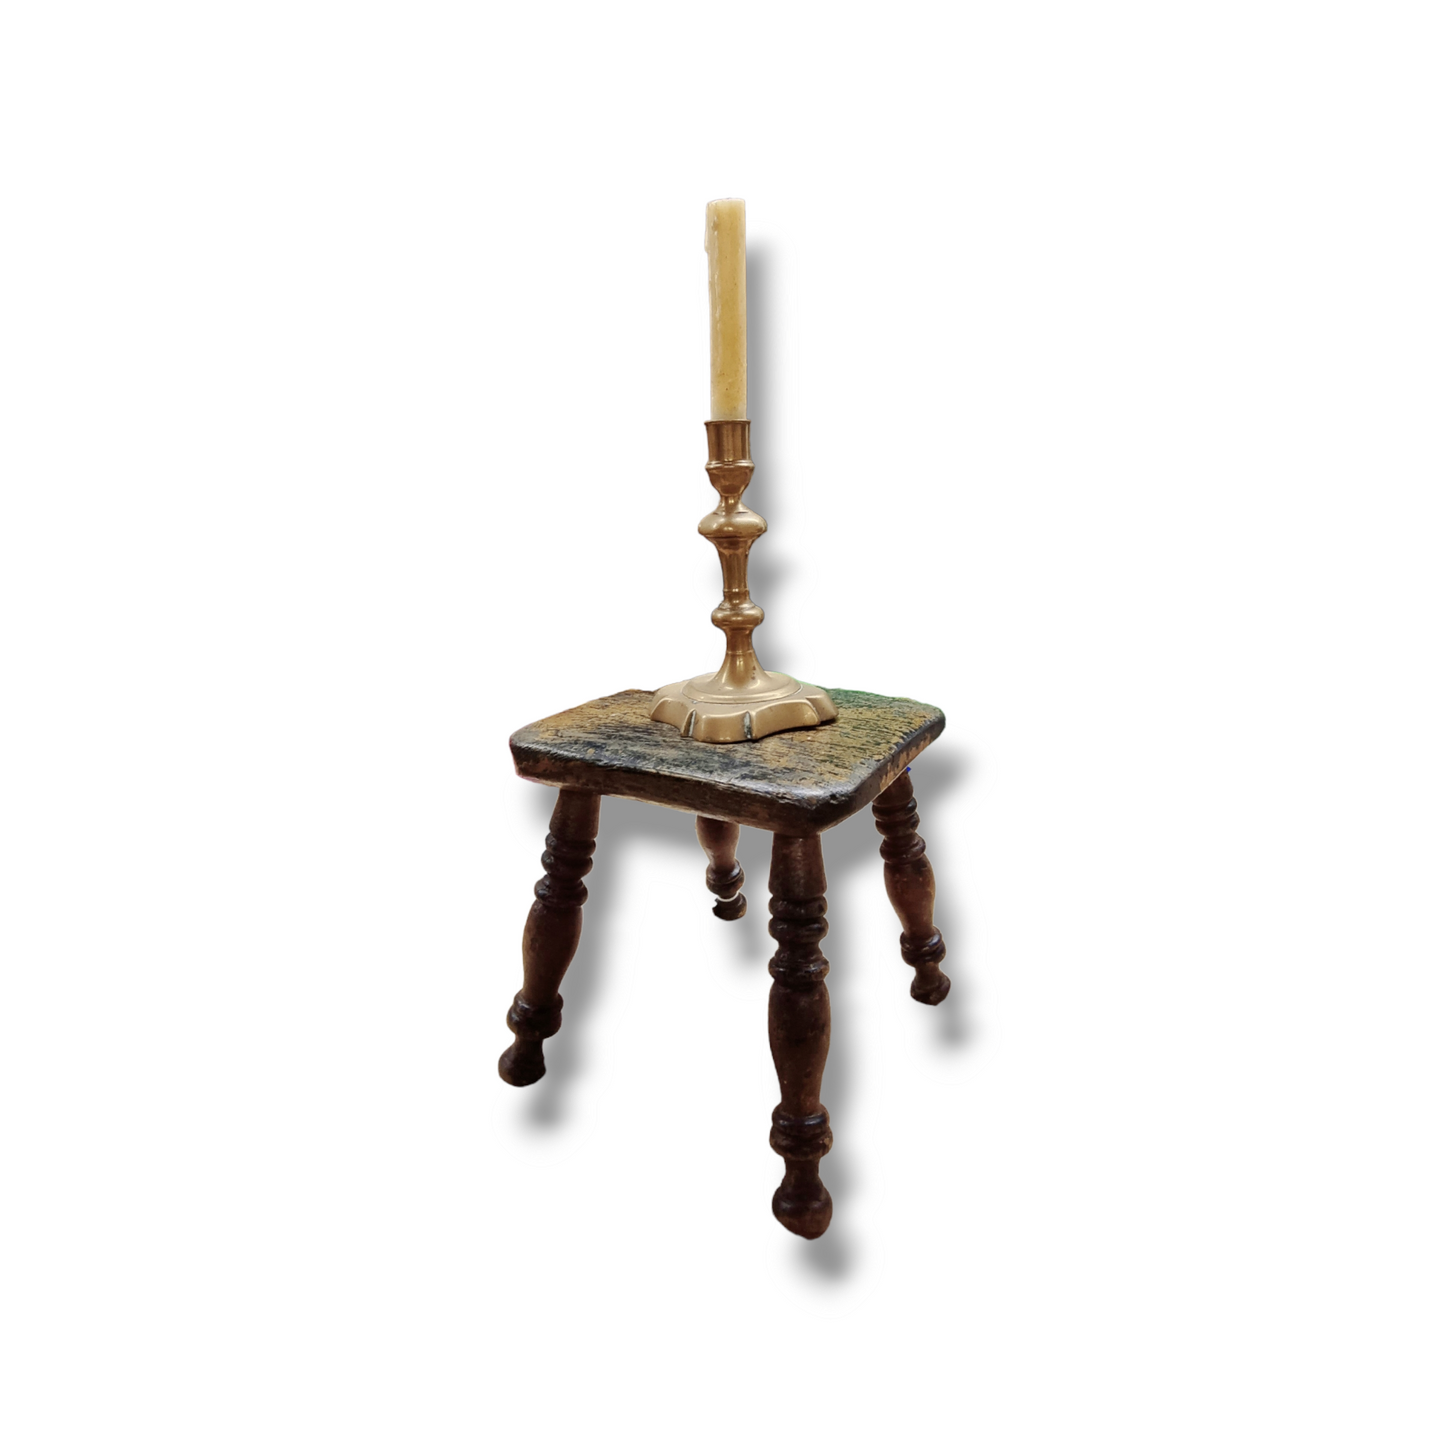 Early 19th Century George III Period English Antique Candlestand In Original Paint, Circa 1800-1810